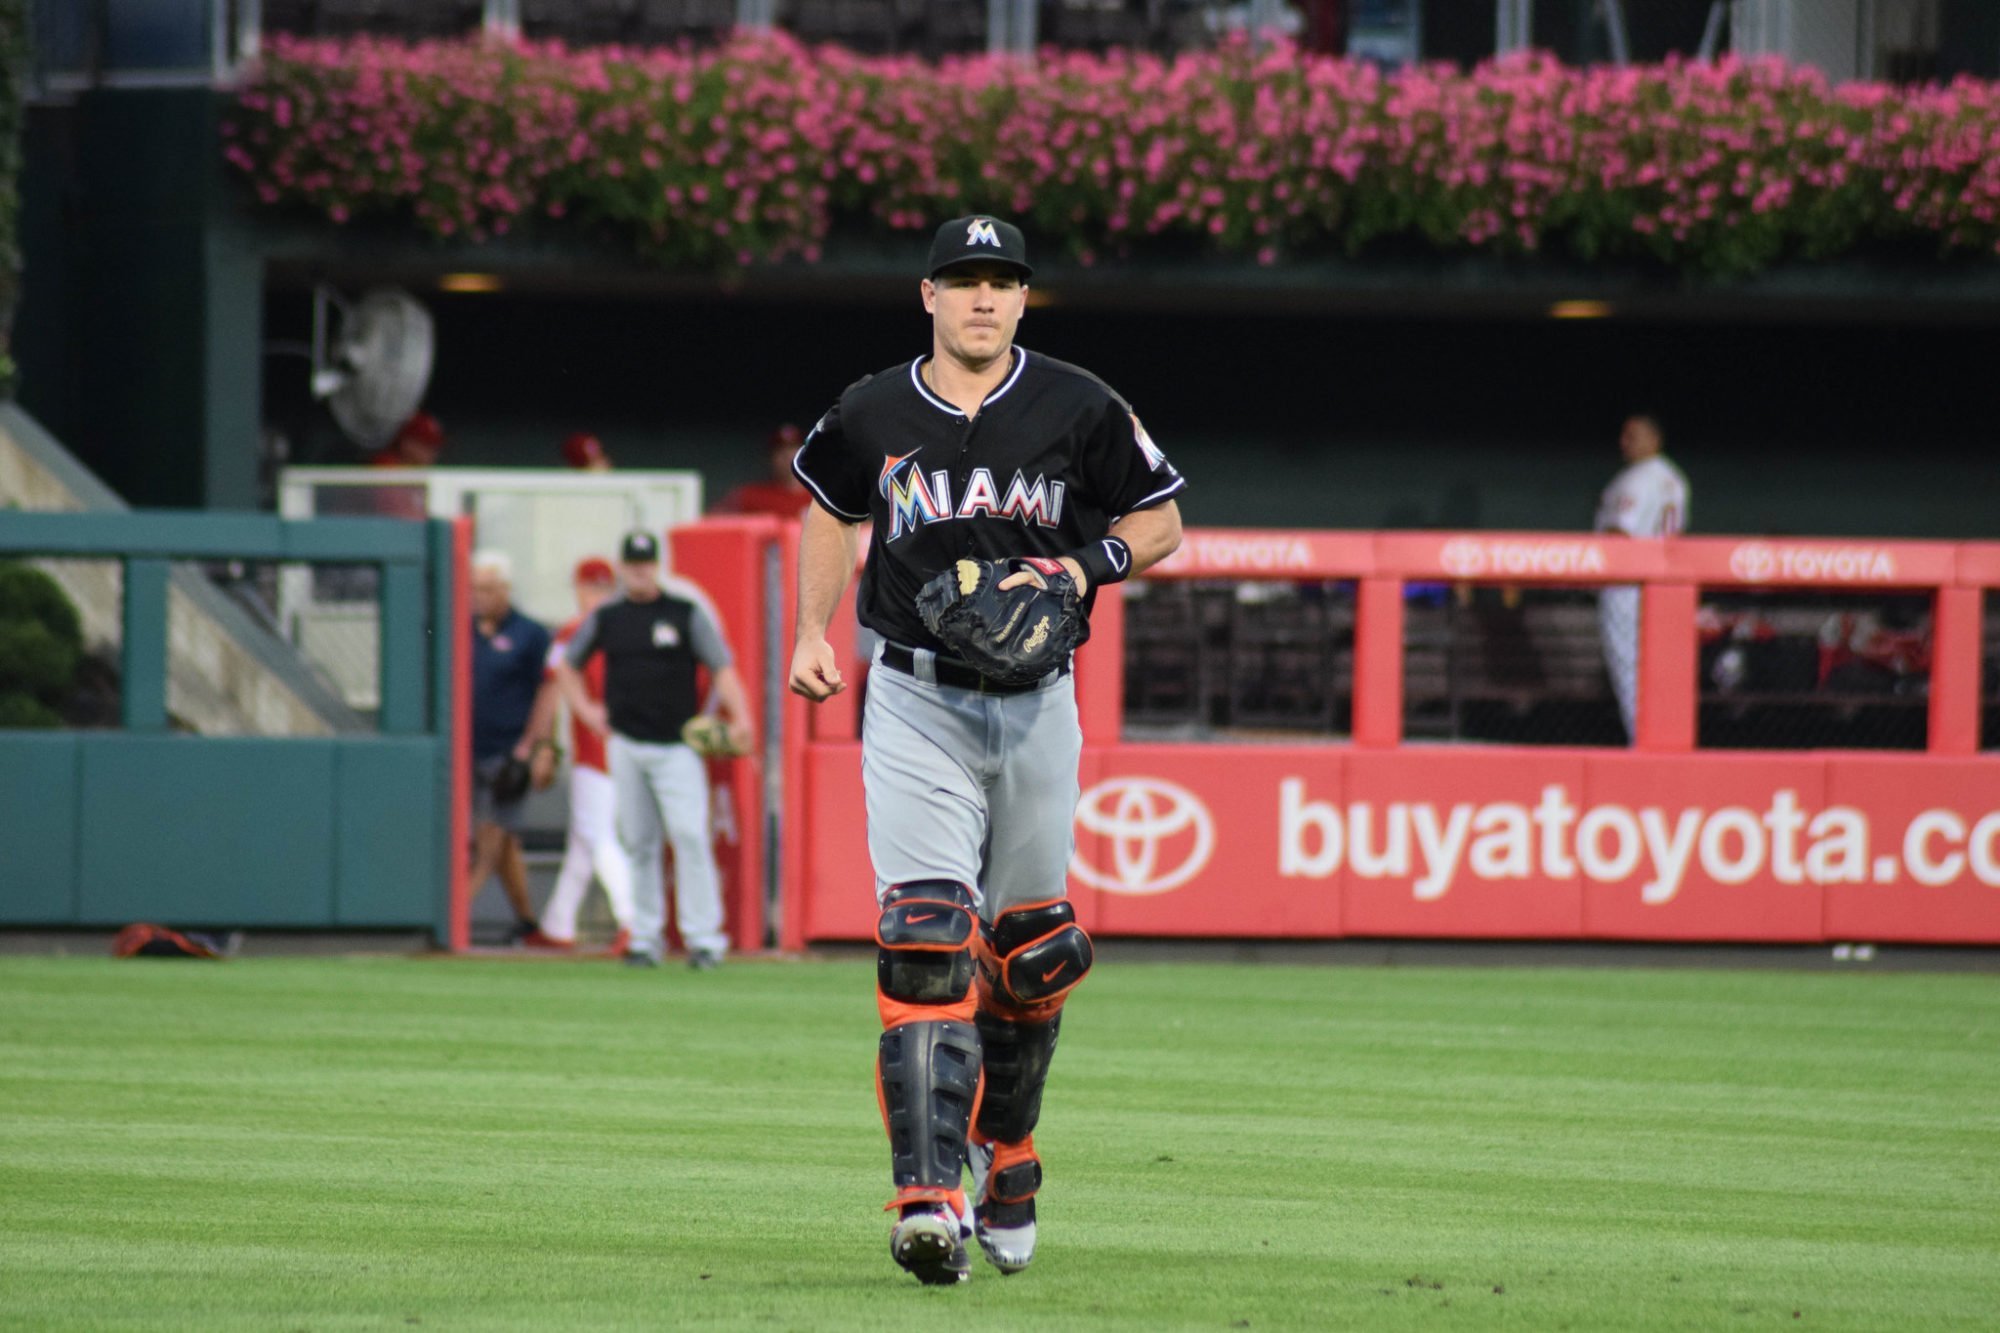 FishStripes - Marlins offseason news ▪️J.T. Realmuto spotted at